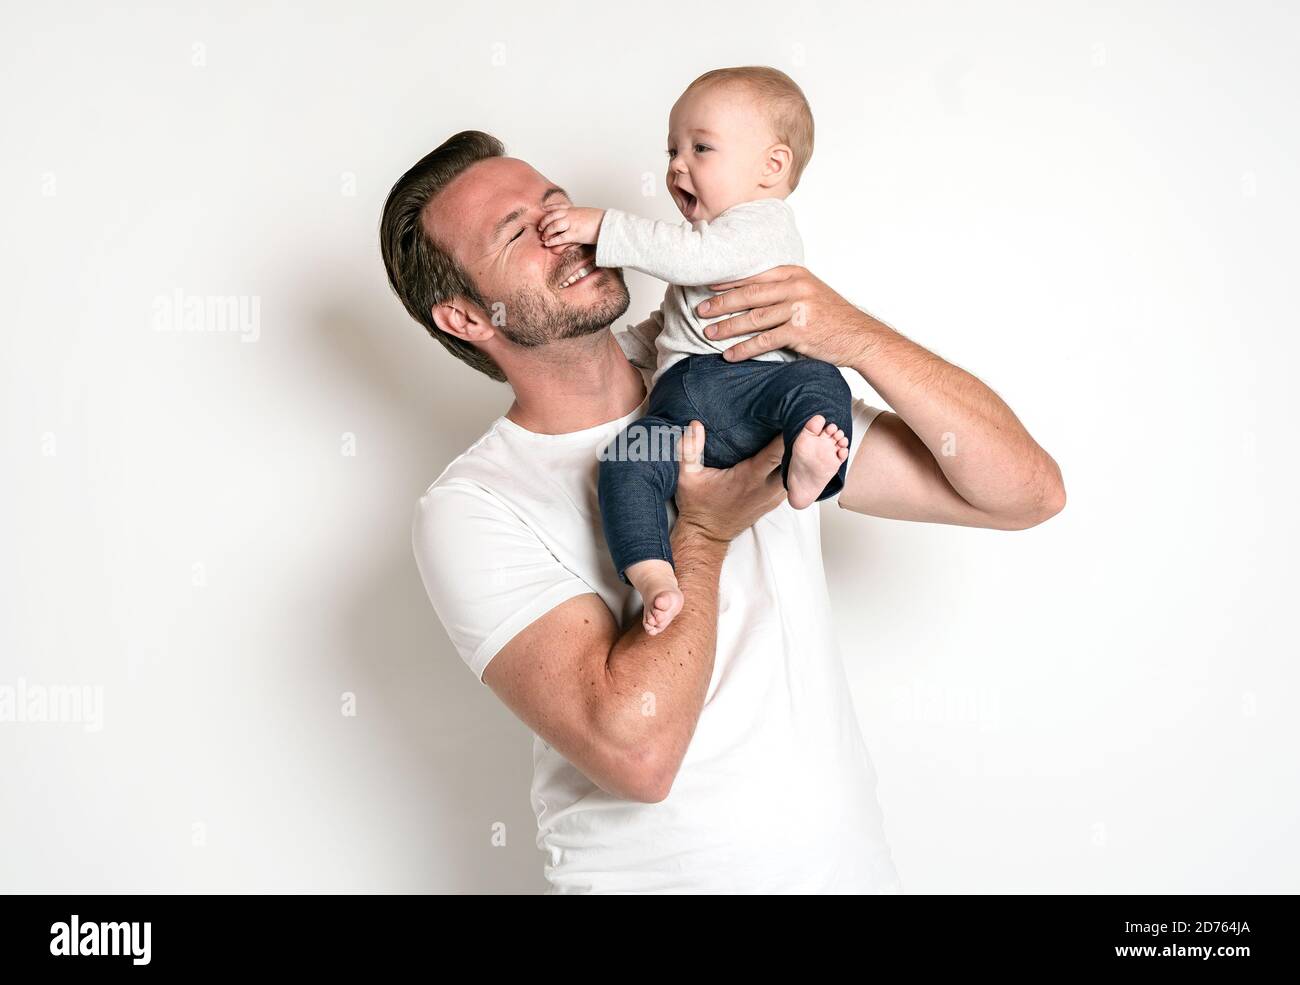 Man holding a smiling 6 months old baby, isolated on white. The baby holding the father nose. Pretty funny situation Stock Photo